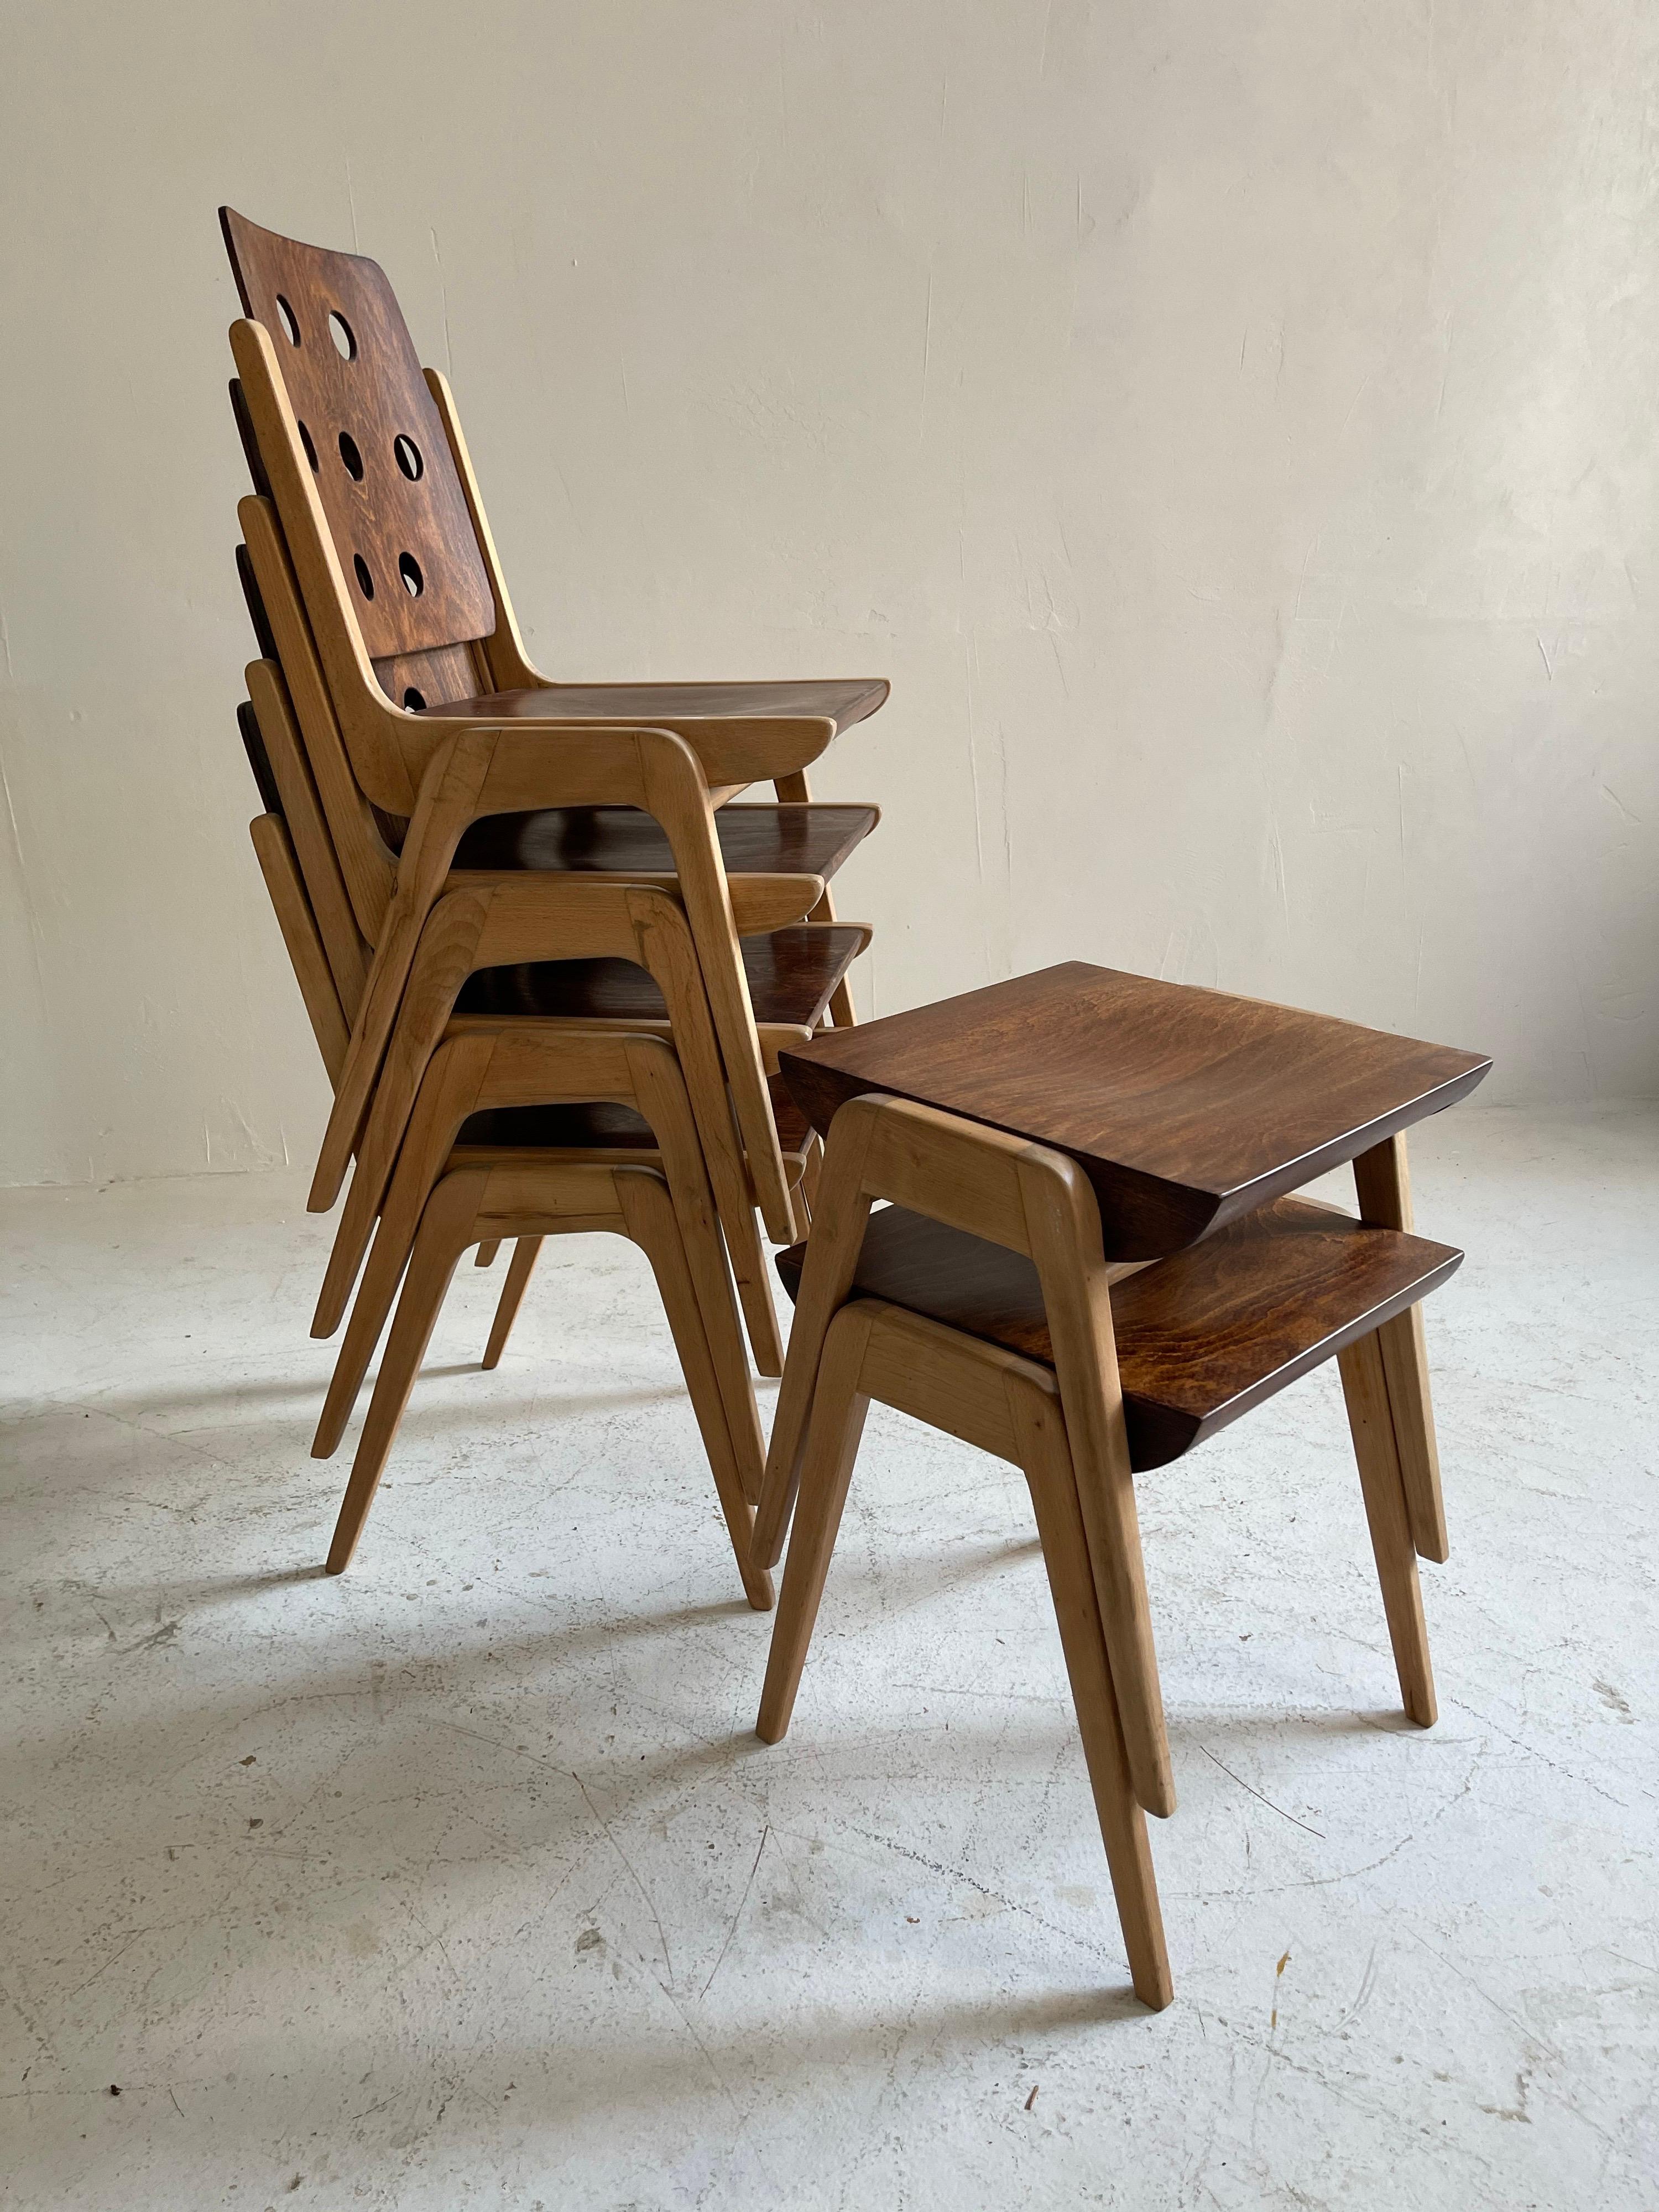 Franz Schuster Model 'Maestro' Dining Room Chairs & Stools, Austria, 1950s For Sale 4